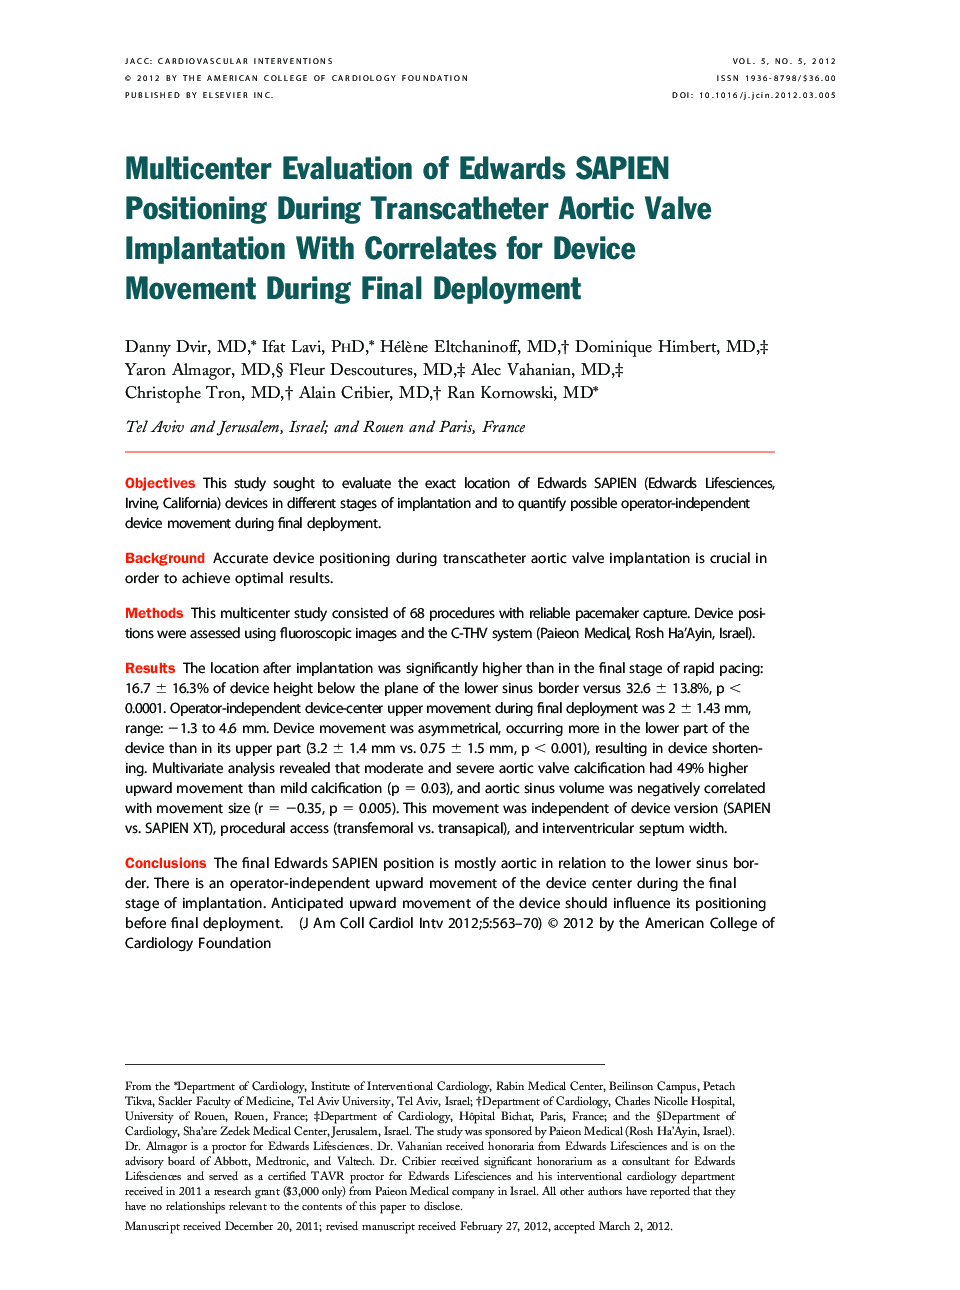 Multicenter Evaluation of Edwards SAPIEN Positioning During Transcatheter Aortic Valve Implantation With Correlates for Device Movement During Final Deployment